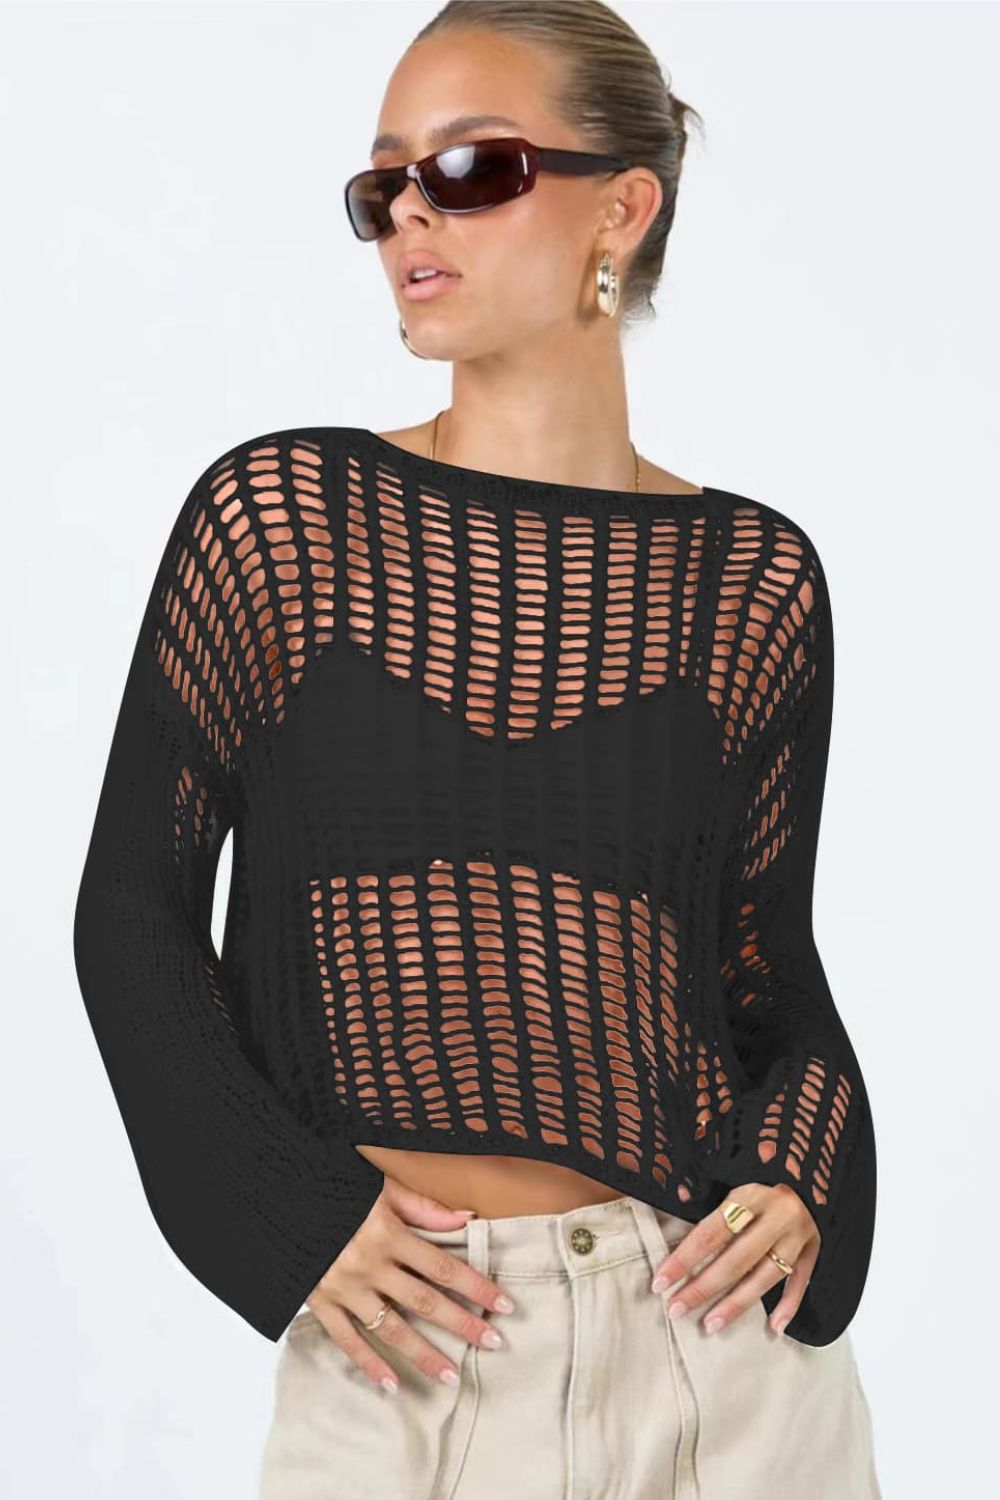 Openwork Boat Neck Long Sleeve Cover Up in 4 Color Choices in Size S, M, L, or XL